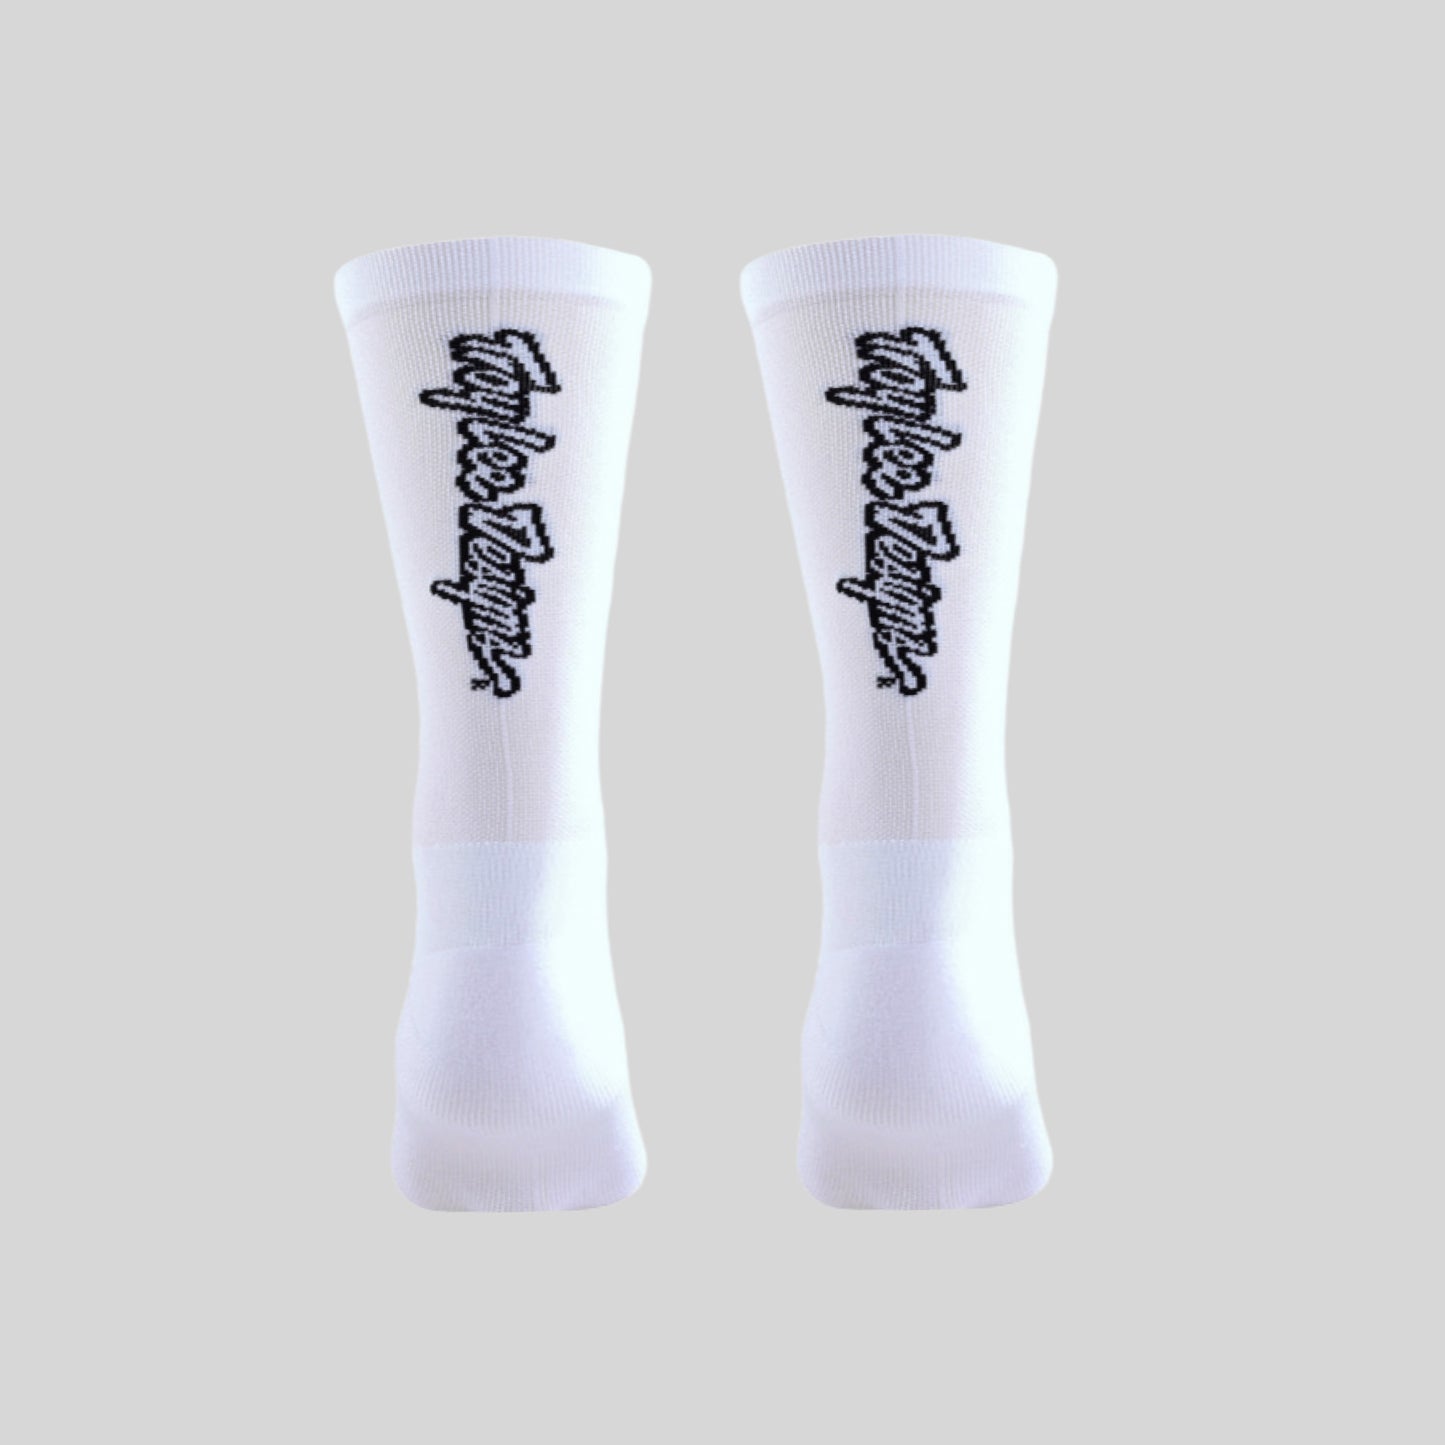 Troy Lee Designs Performance Signature Socks White from Ascender Cycling Club Zürich Switzerland Back Side View